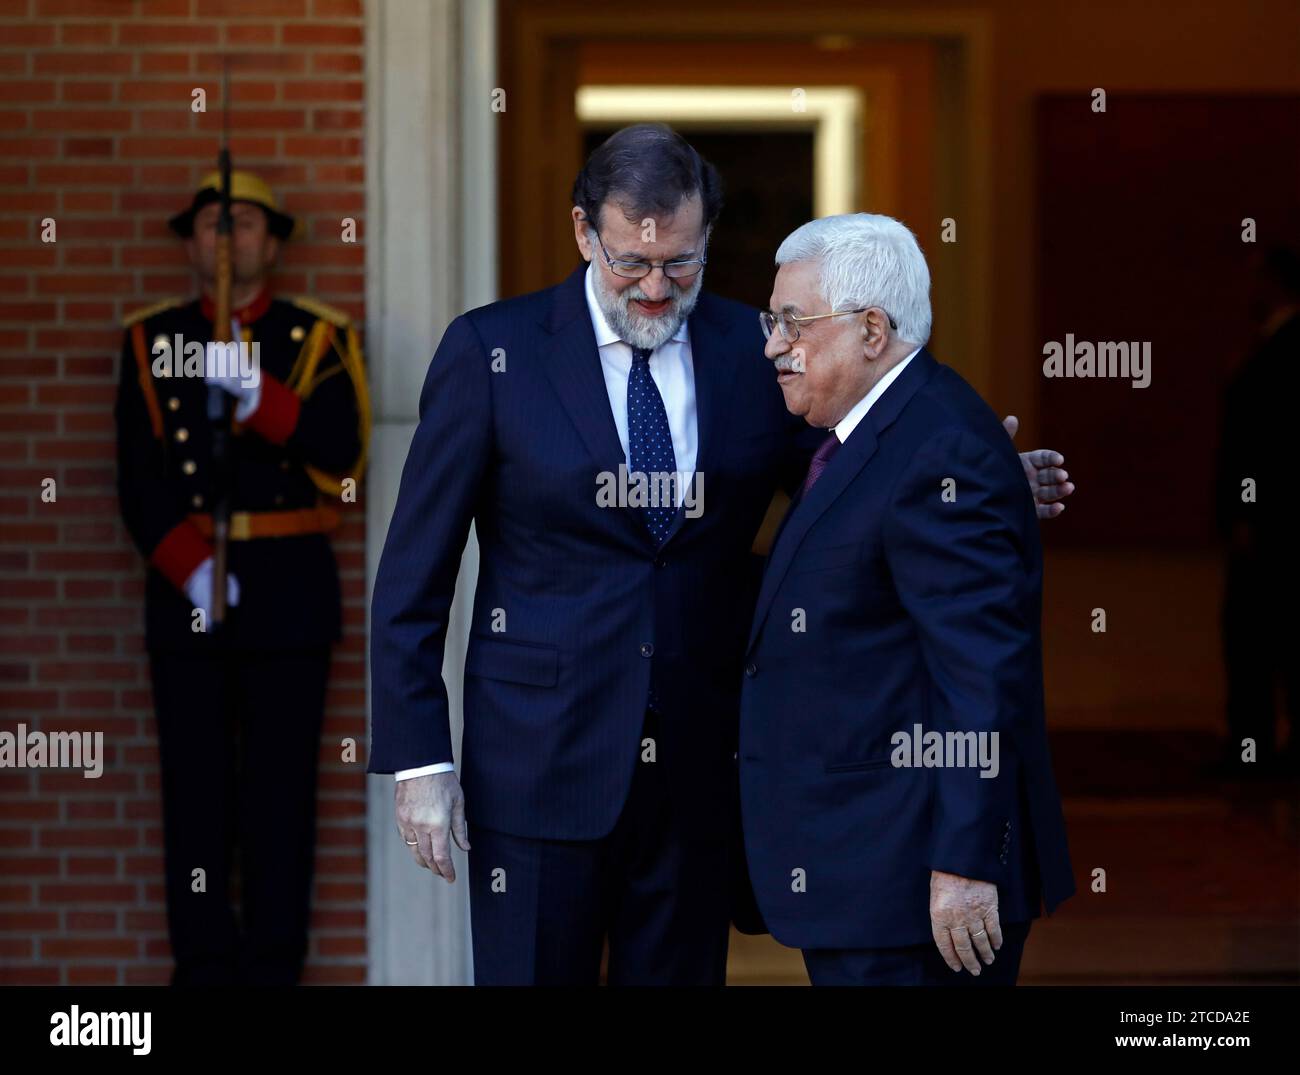 Madrid, 11/20/2017. The President of the Government Mariano Rajoy receives the President of the Palestinian National Authority Mahmoud Abbas at La Moncloa. Photo: Oscar del Pozo ARCHDC. Credit: Album / Archivo ABC / Oscar del Pozo Stock Photo